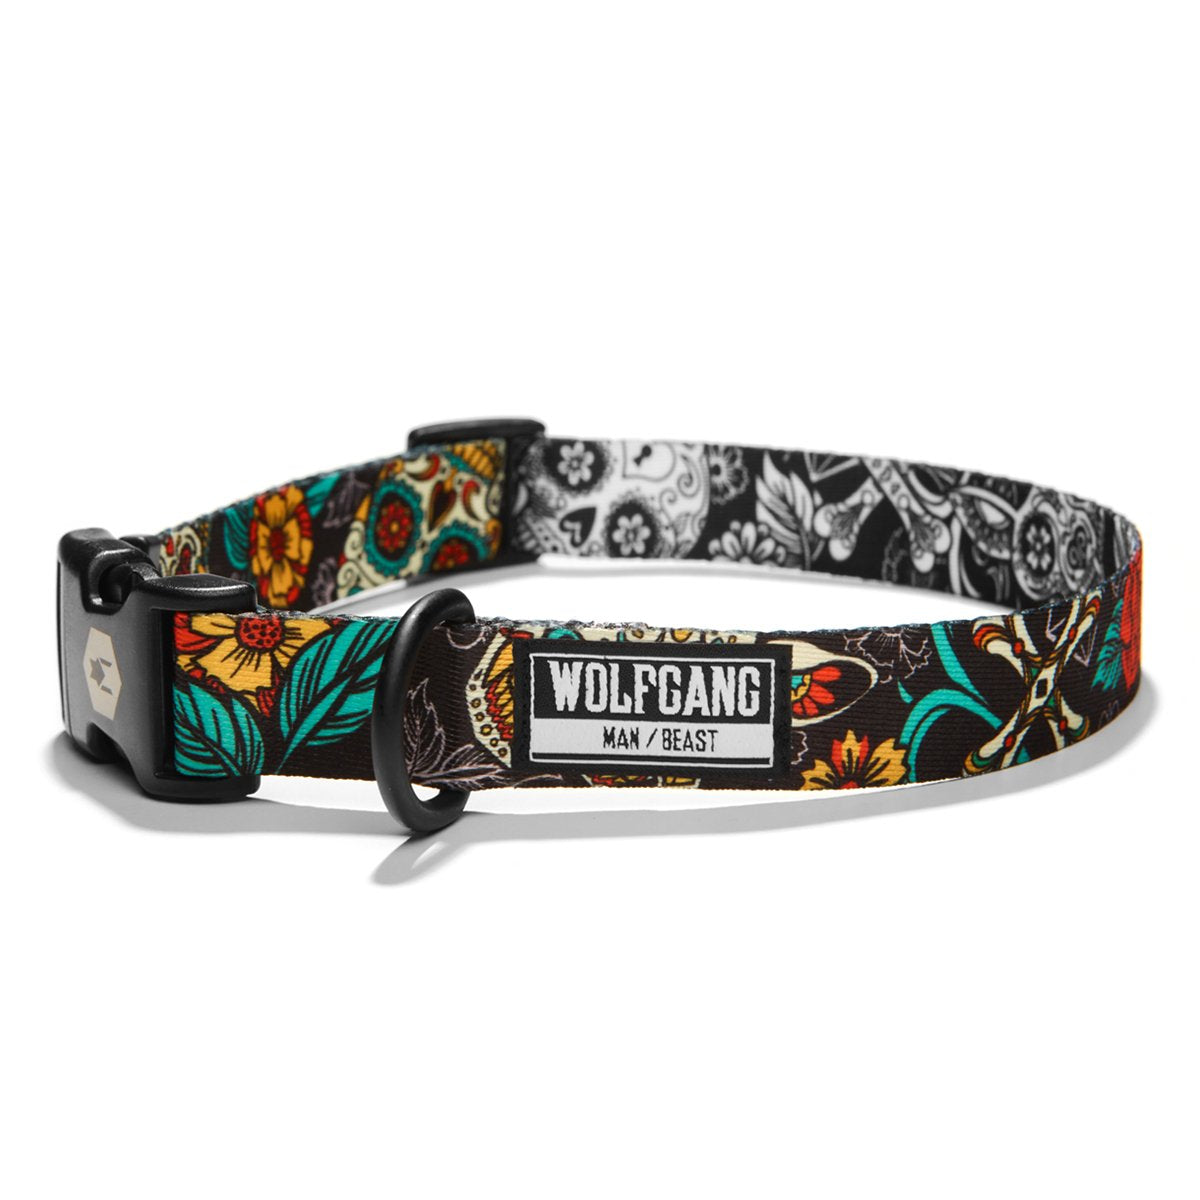 LosMuertos DOG COLLAR Made in the USA by Wolfgang Man & Beast